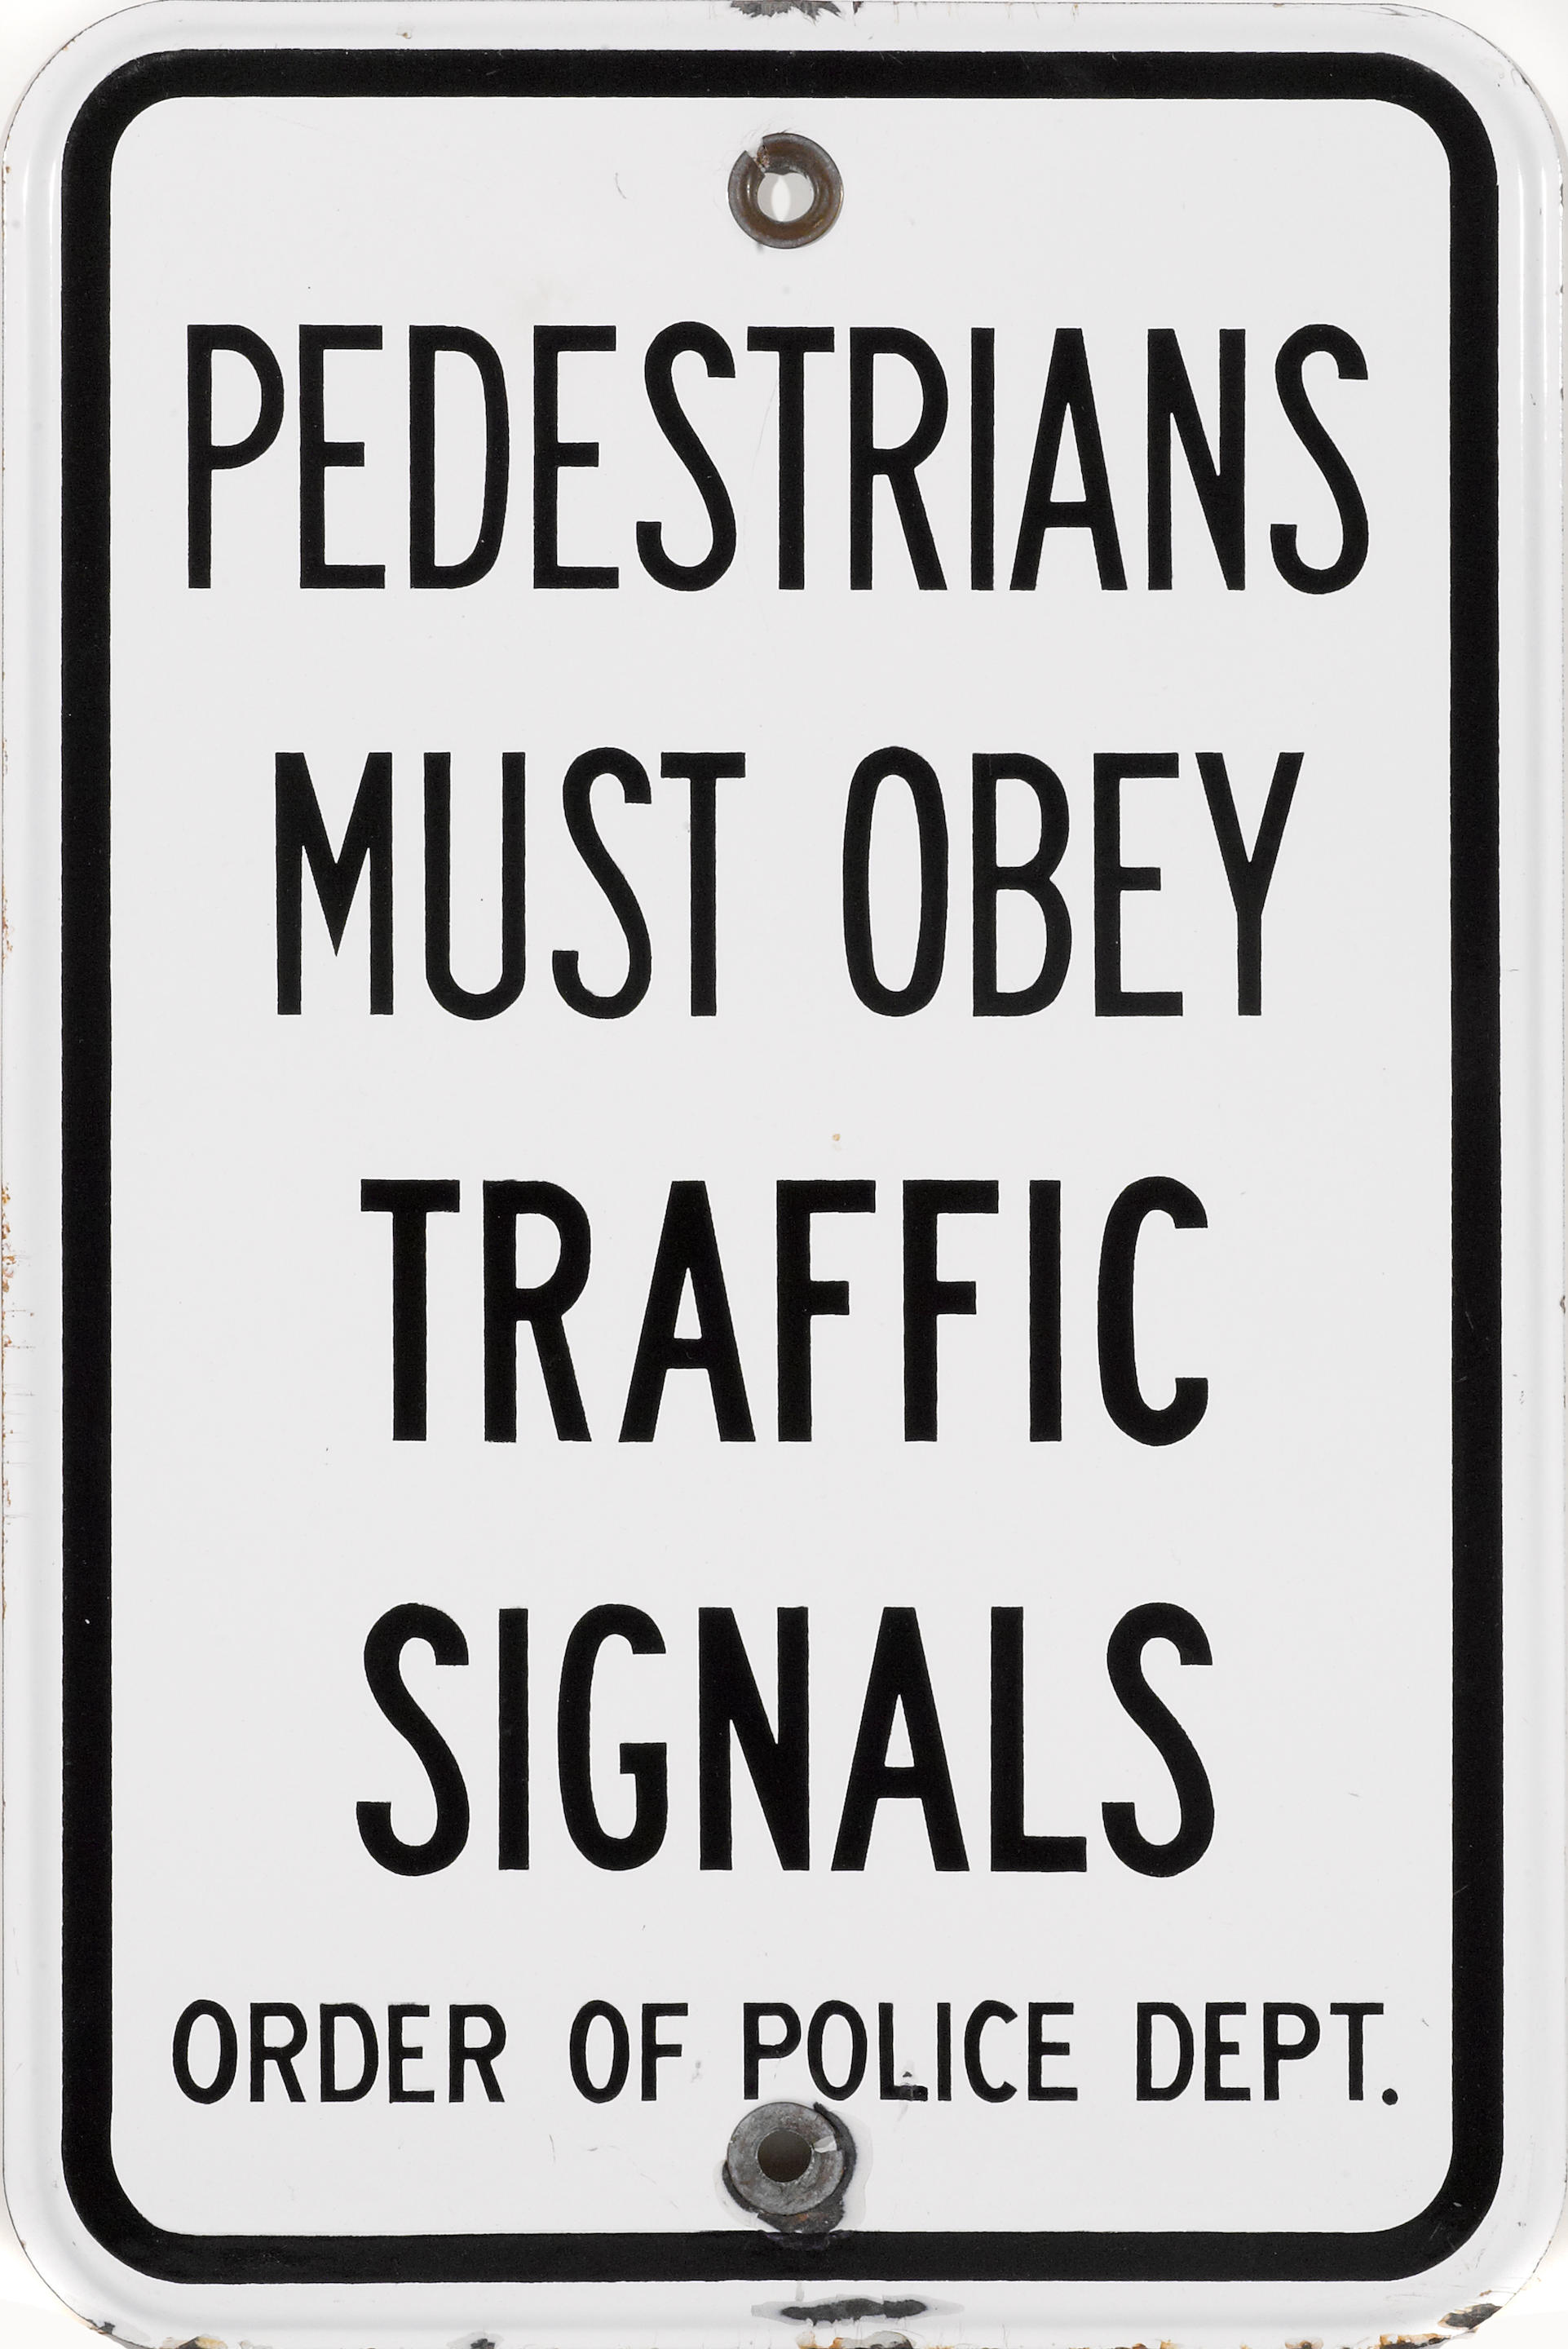 pedestrians and bicycle riders do not have to obey traffic signals.